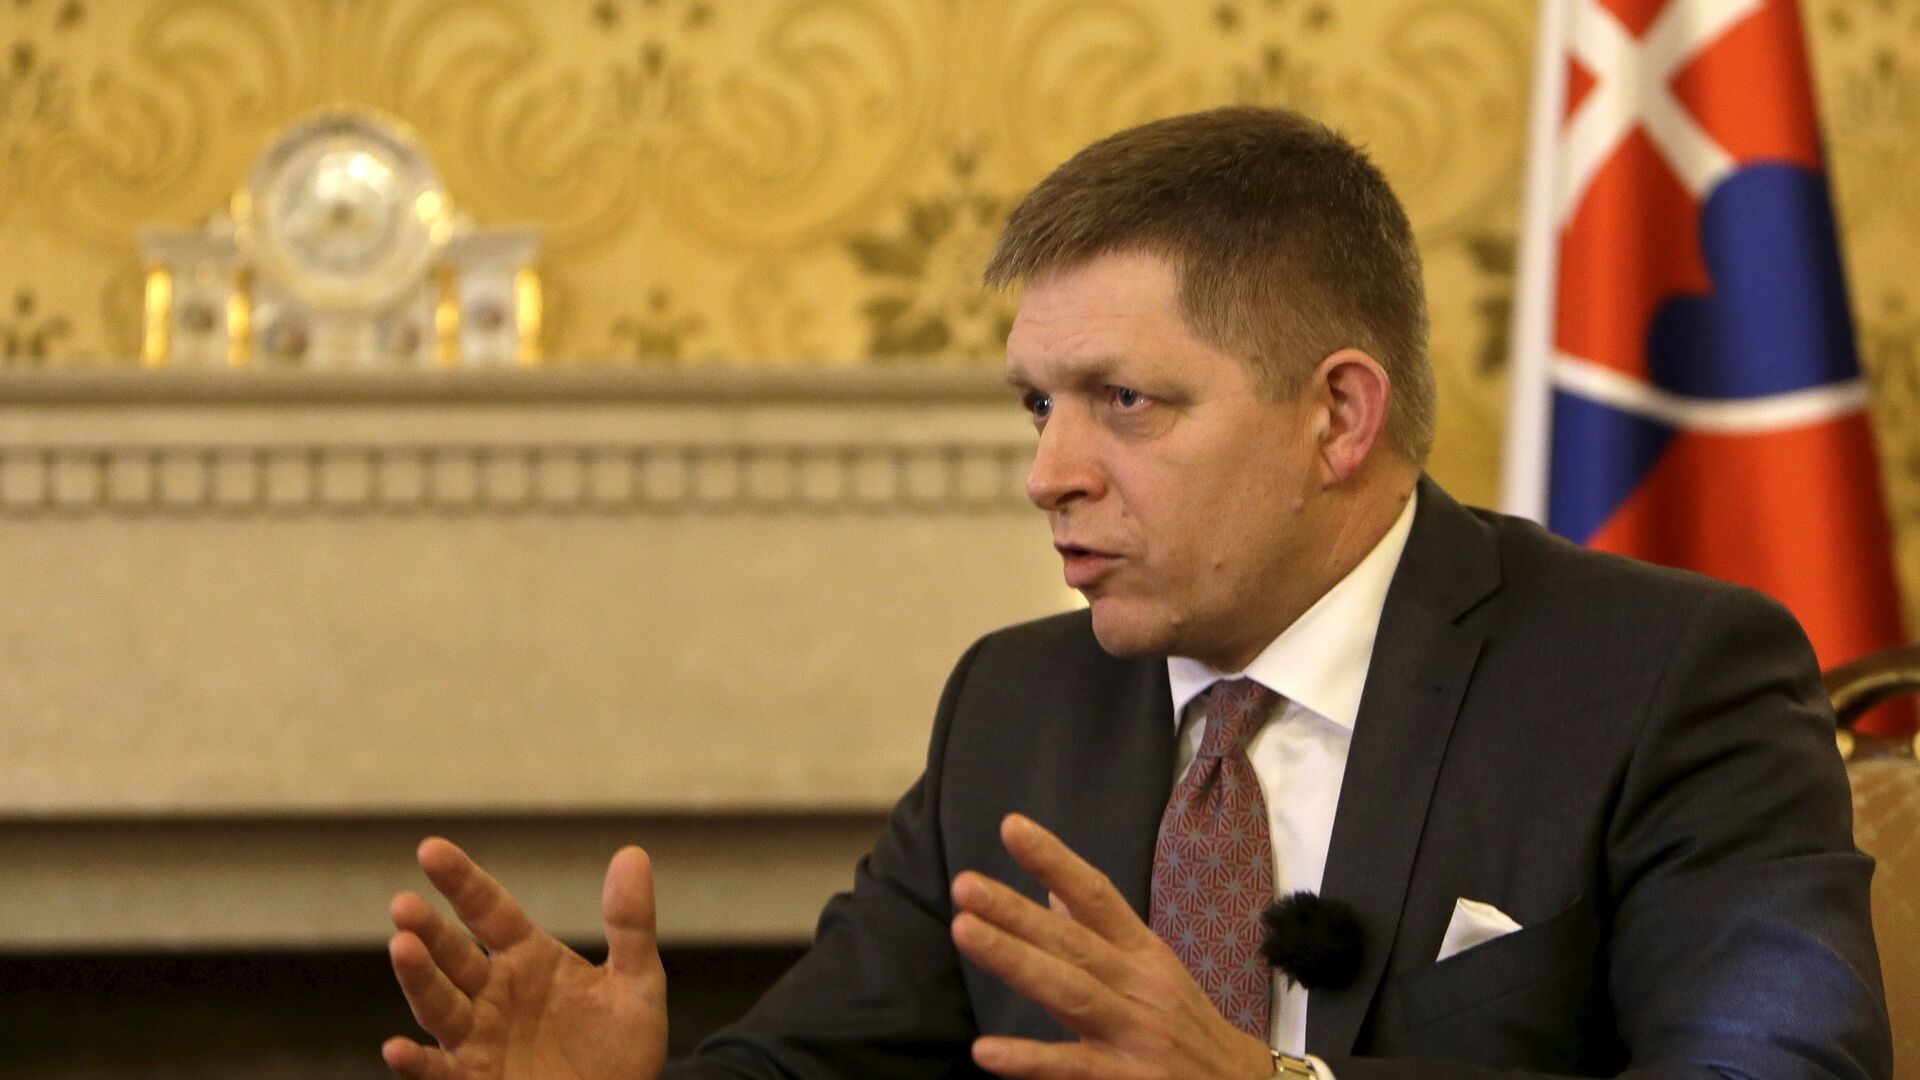 Slovakia's Prime Minister Robert Fico speaks during an interview with Reuters in Bratislava, Slovakia, February 22, 2016 - Sputnik International, 1920, 18.09.2023